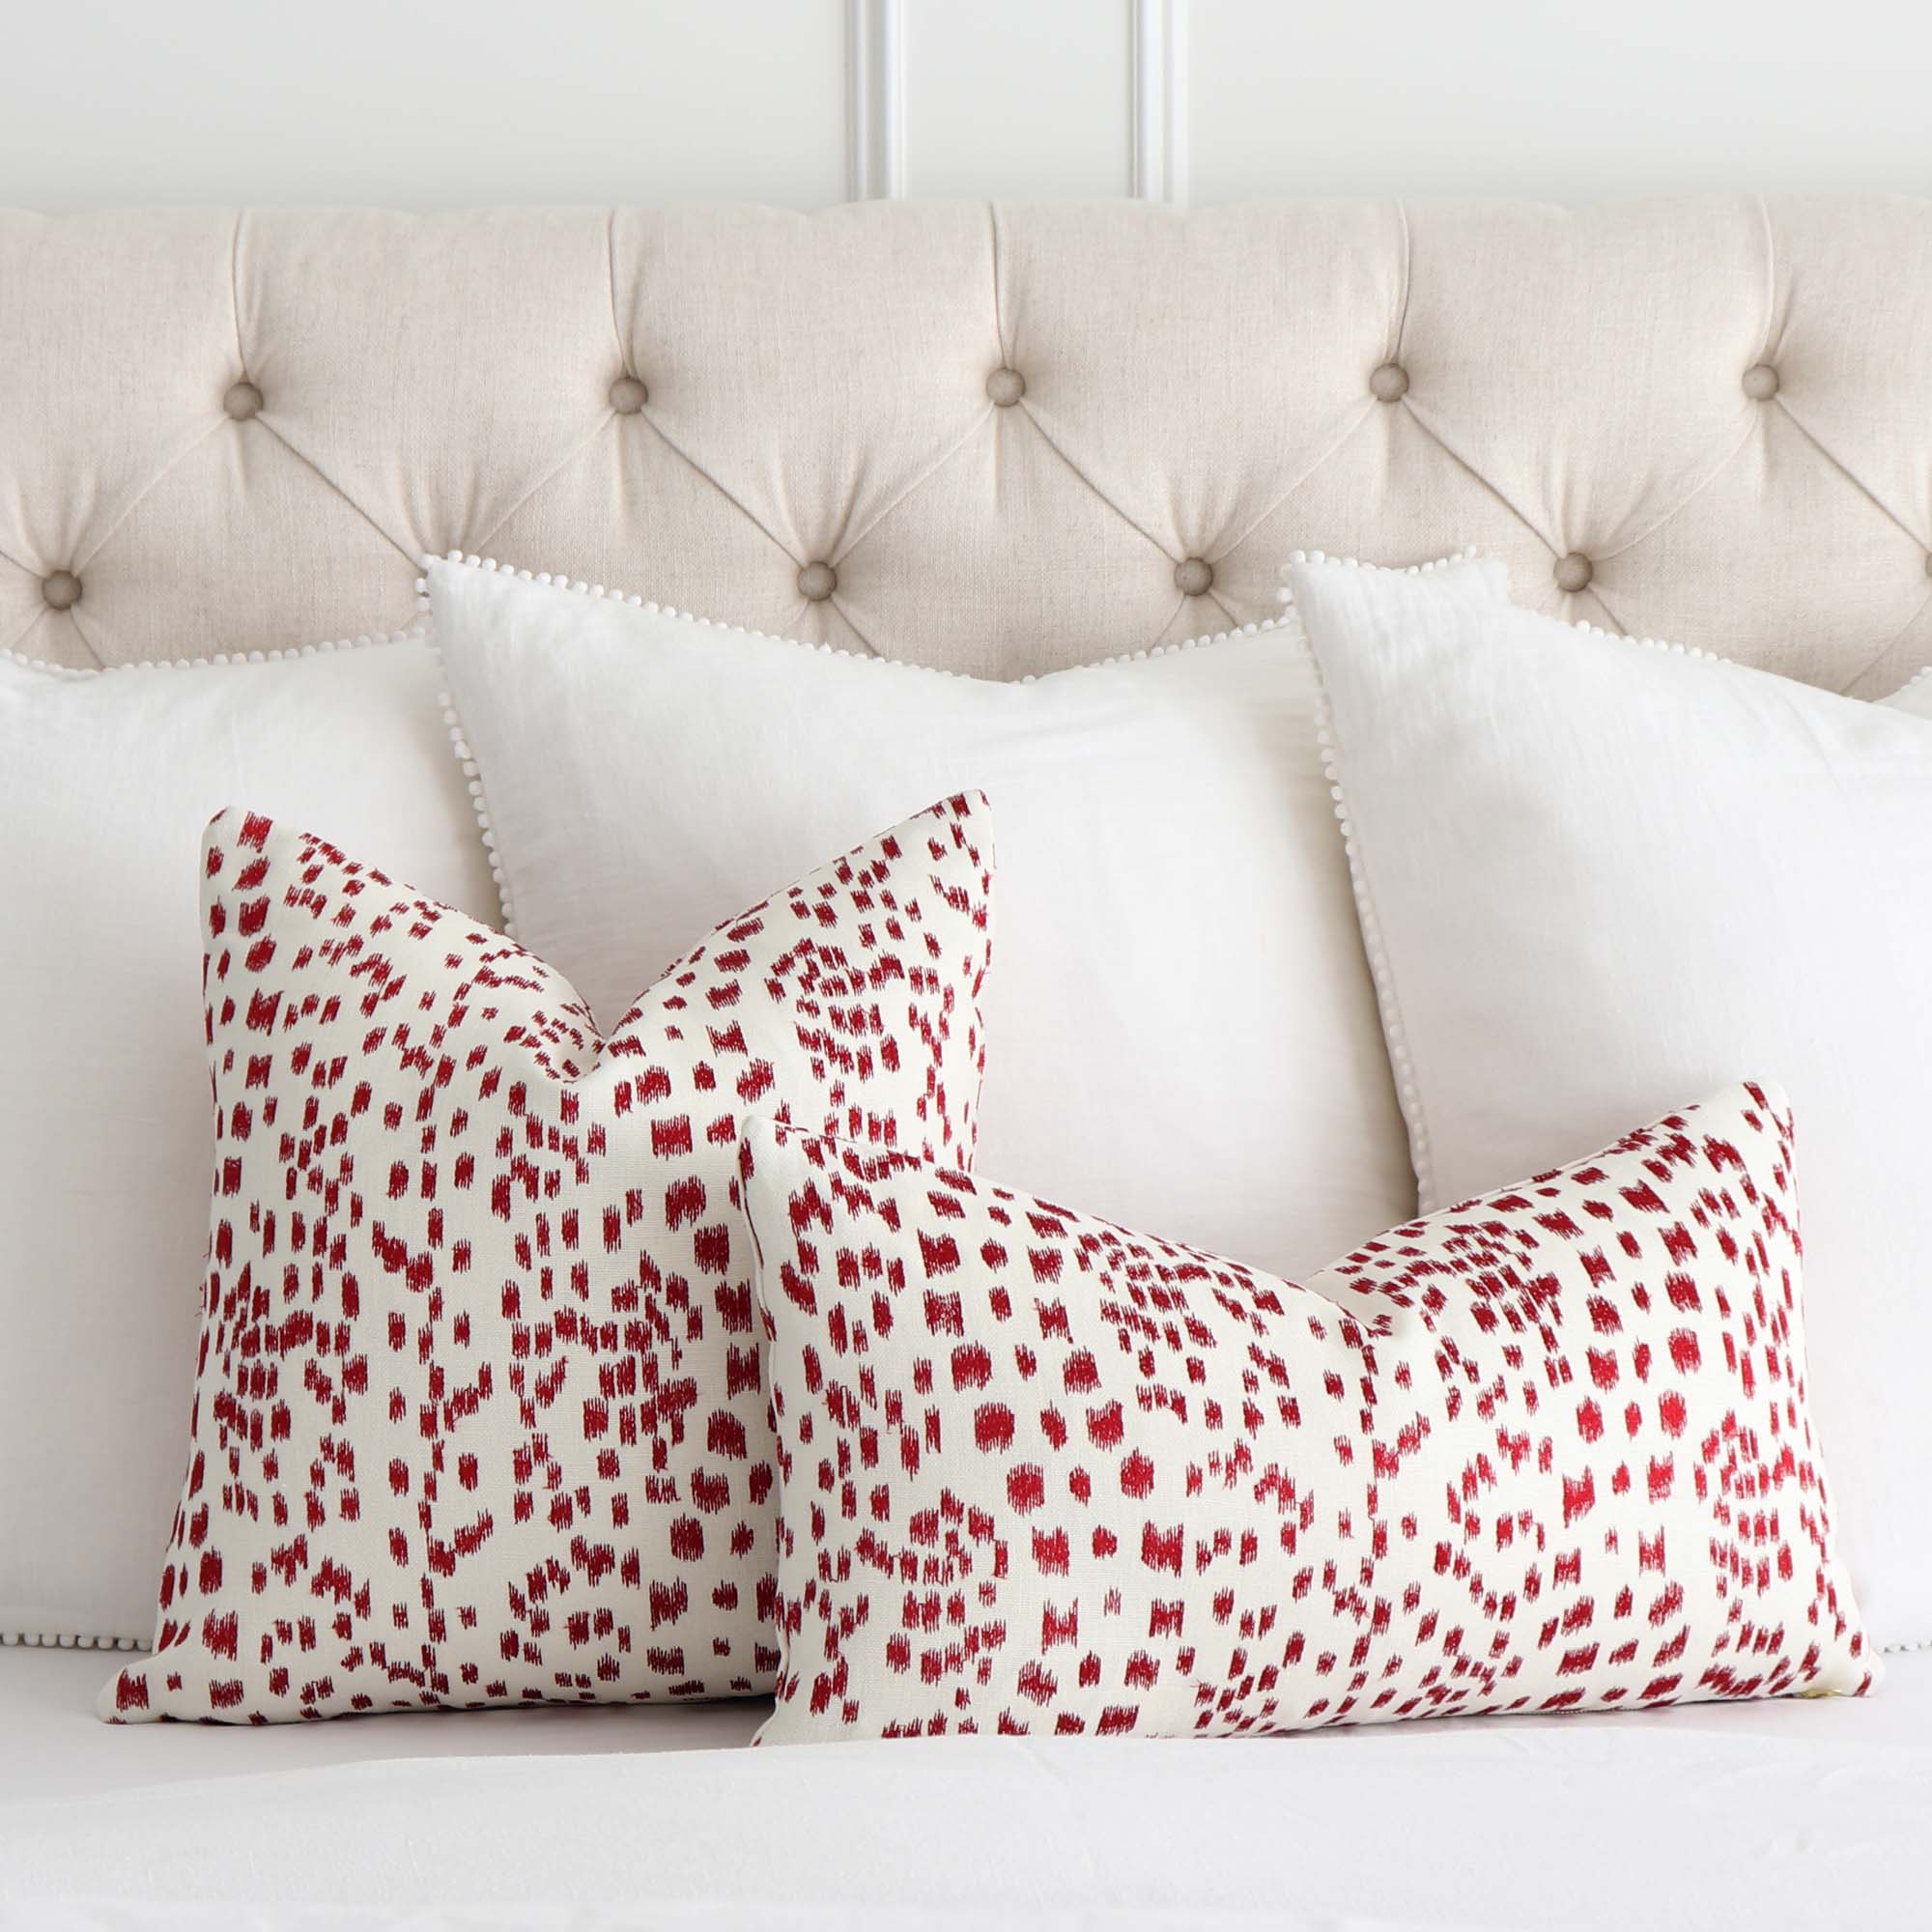 Brunschwig Fils Les Touches Embroidered Poppy Red Luxury Designer Throw Pillow Cover with White Linen Euro Pom Pom Pillows